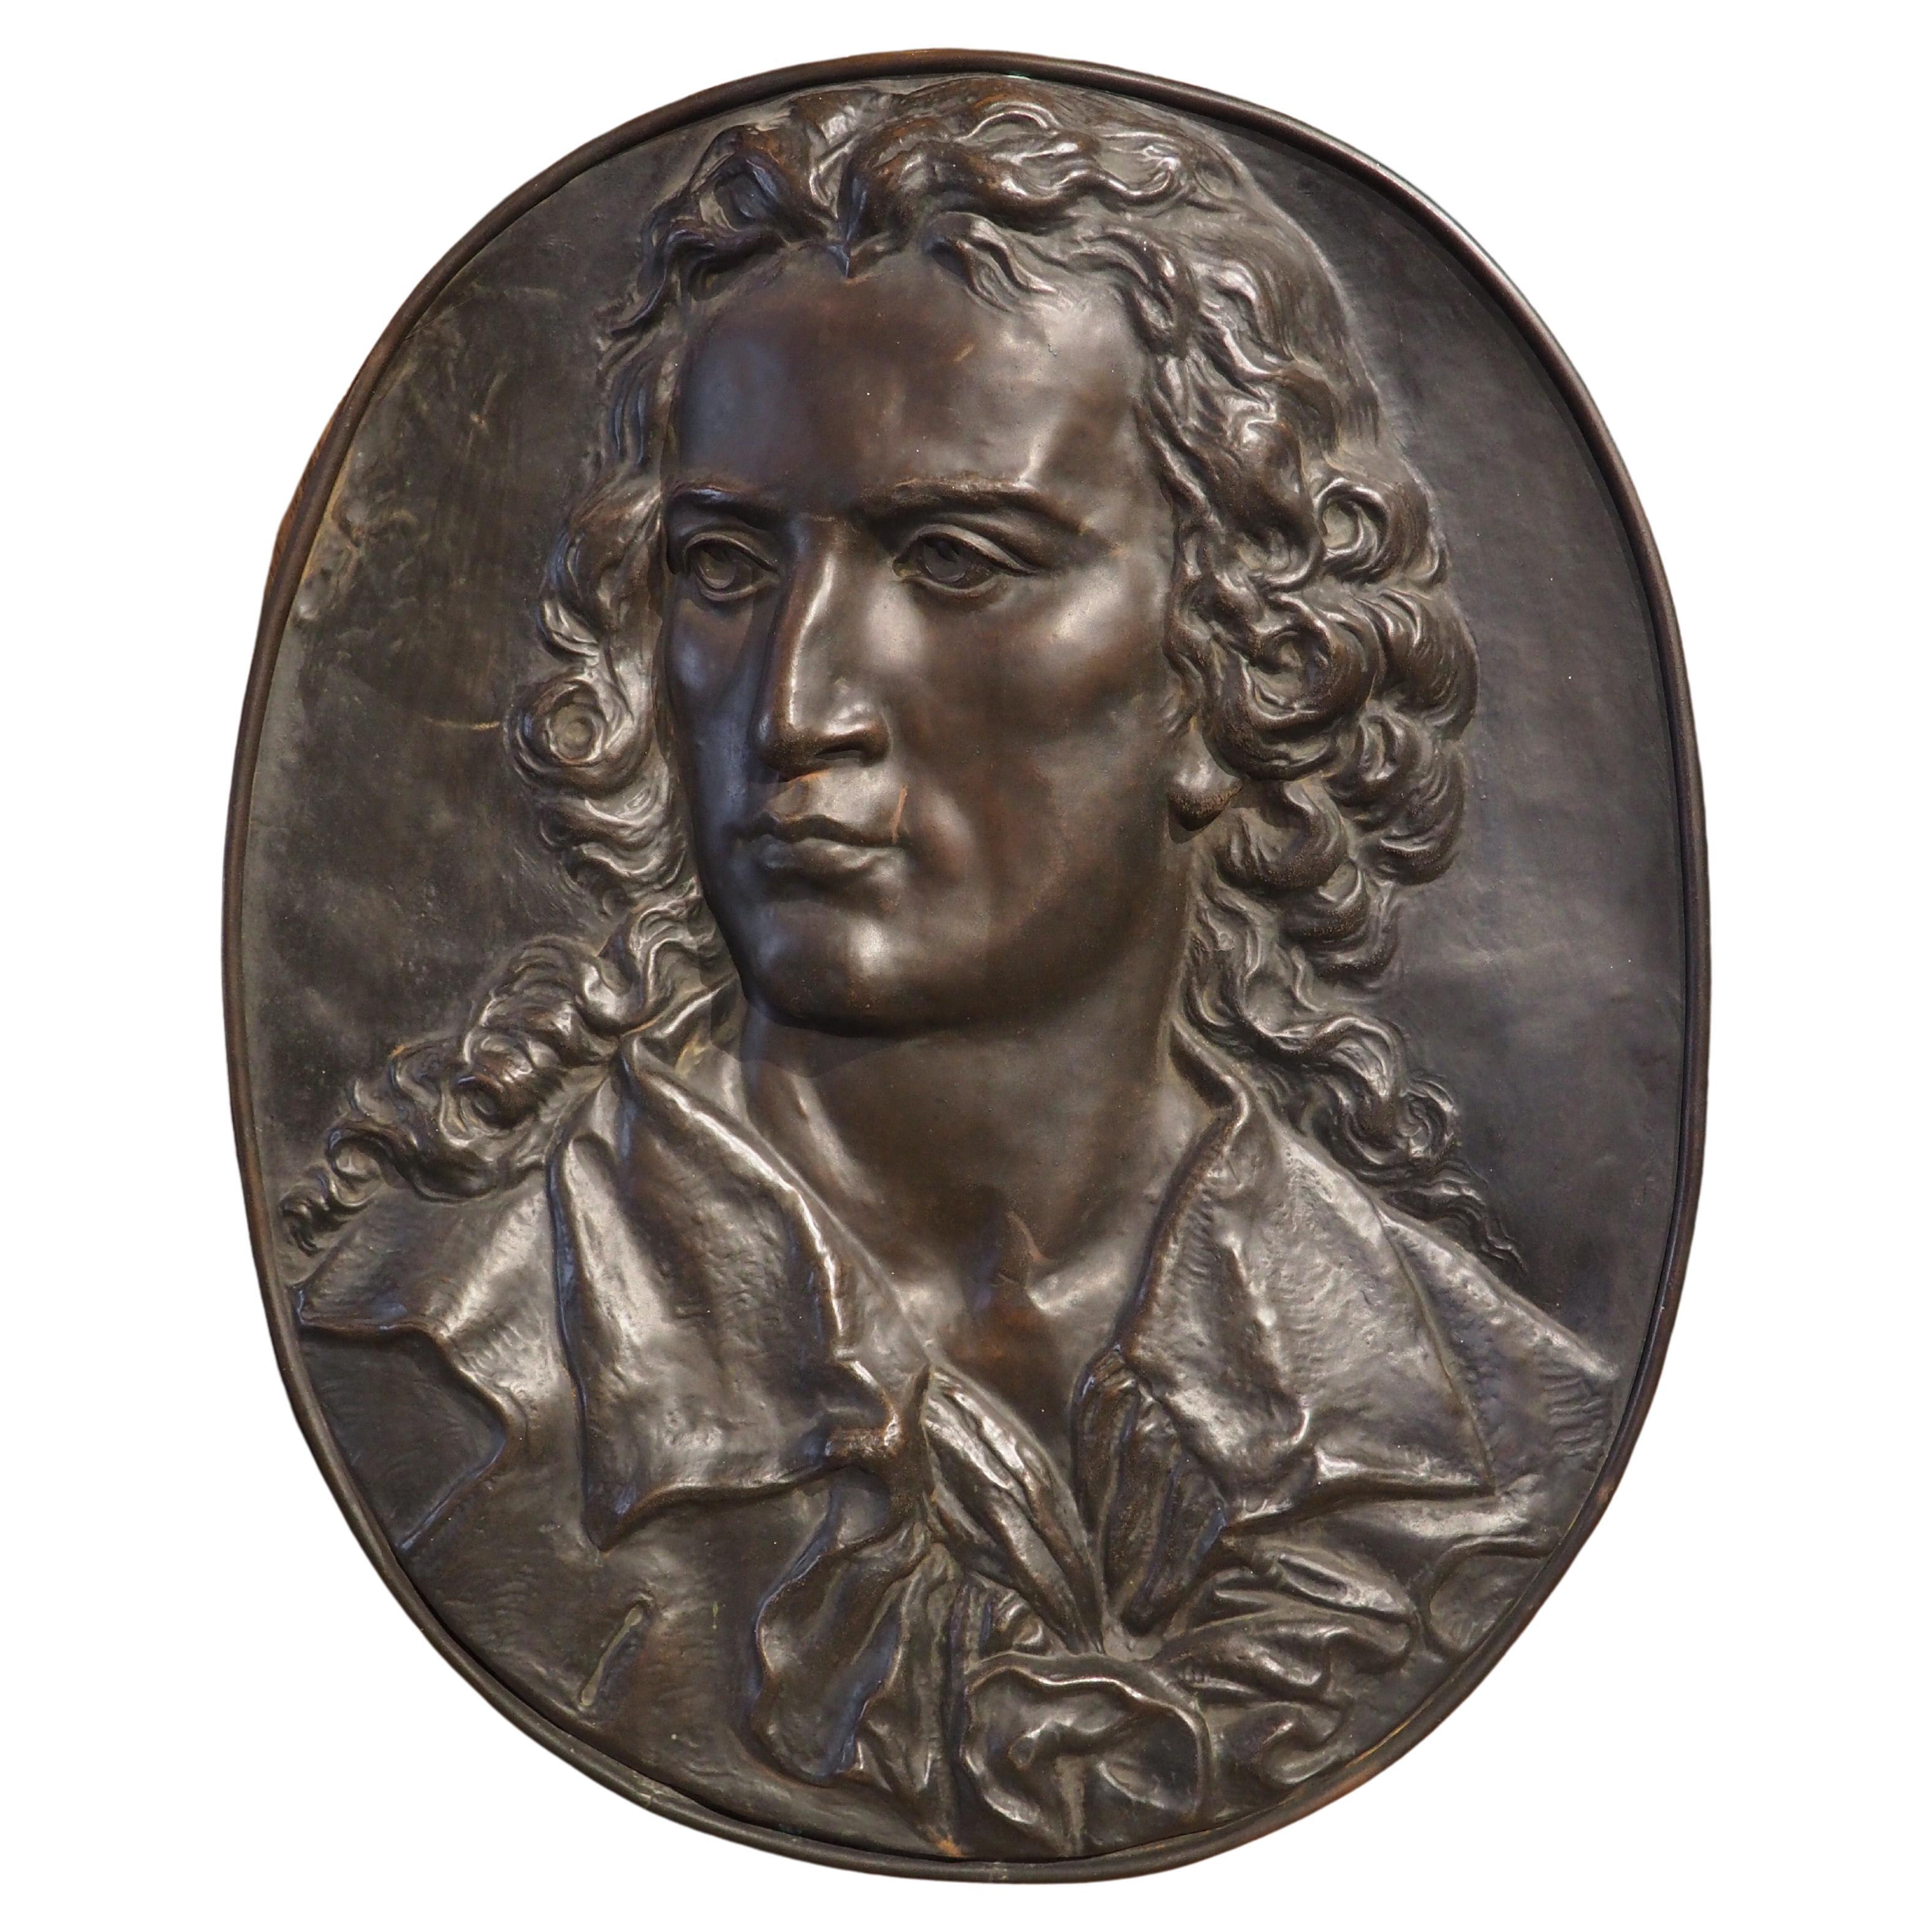 19th Century French Copper Bas Relief Plaque of a Young Nobleman